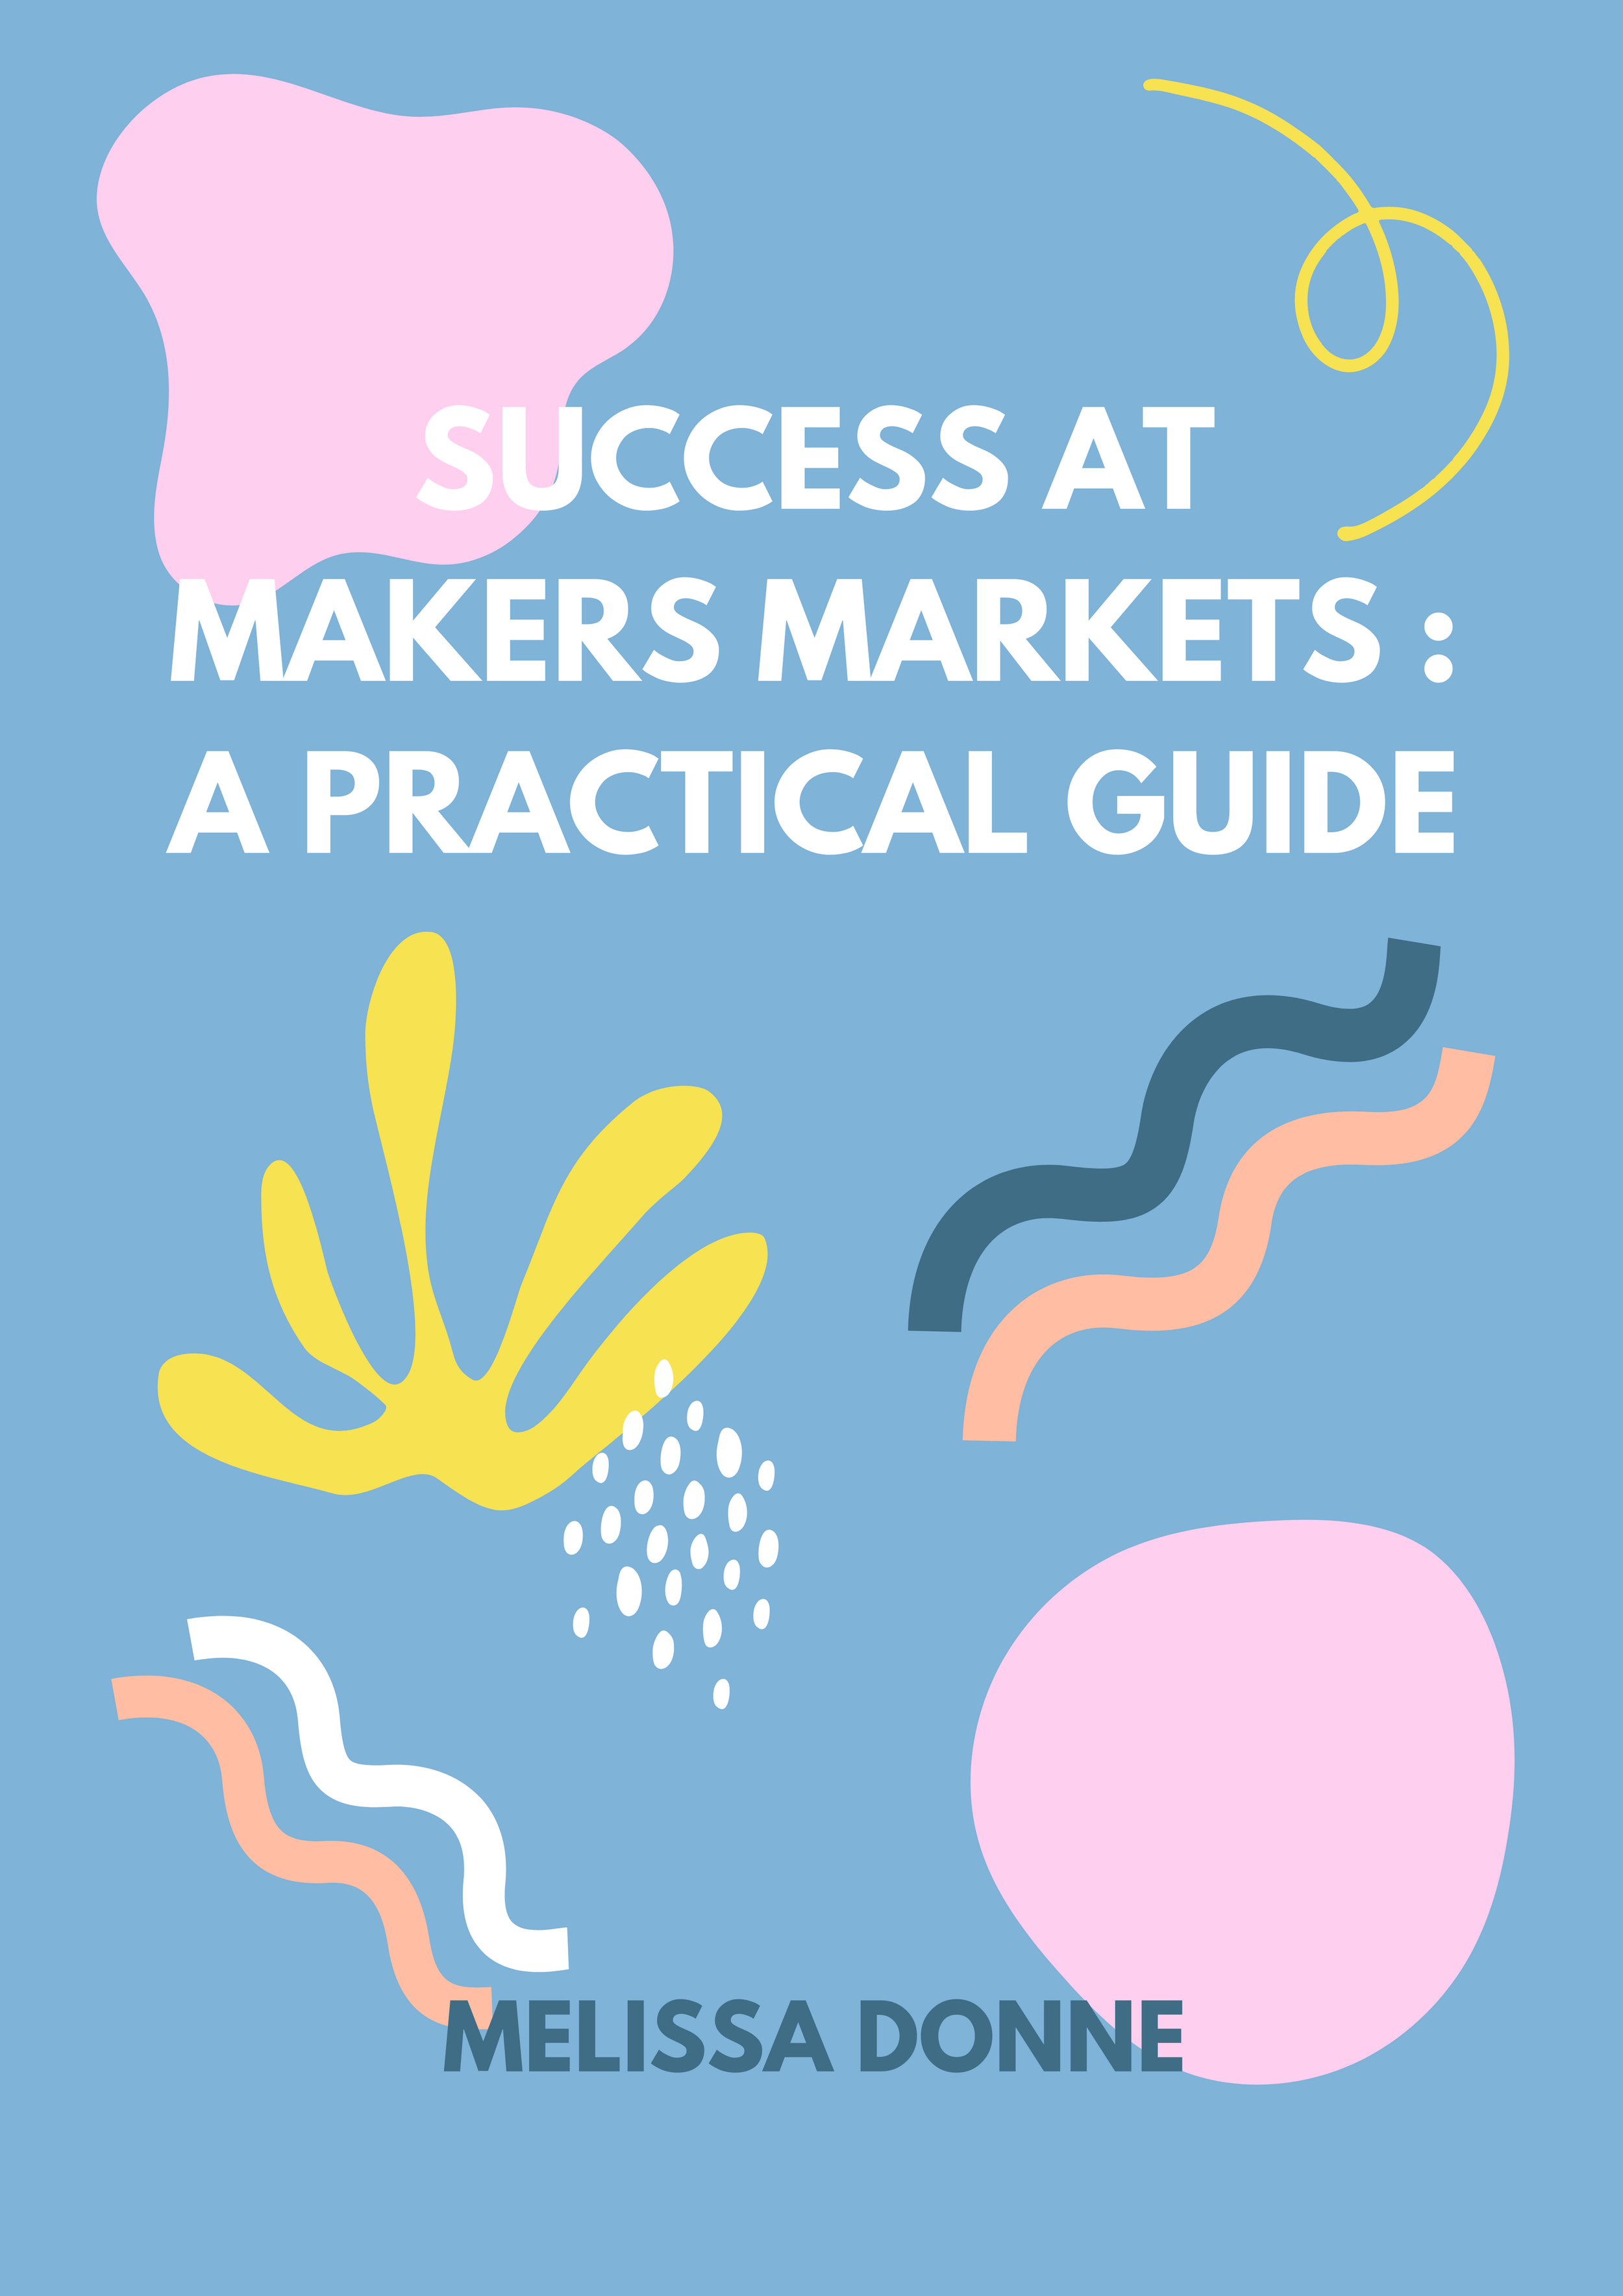 Success at Makers Markets A Practical Guide - 1.png